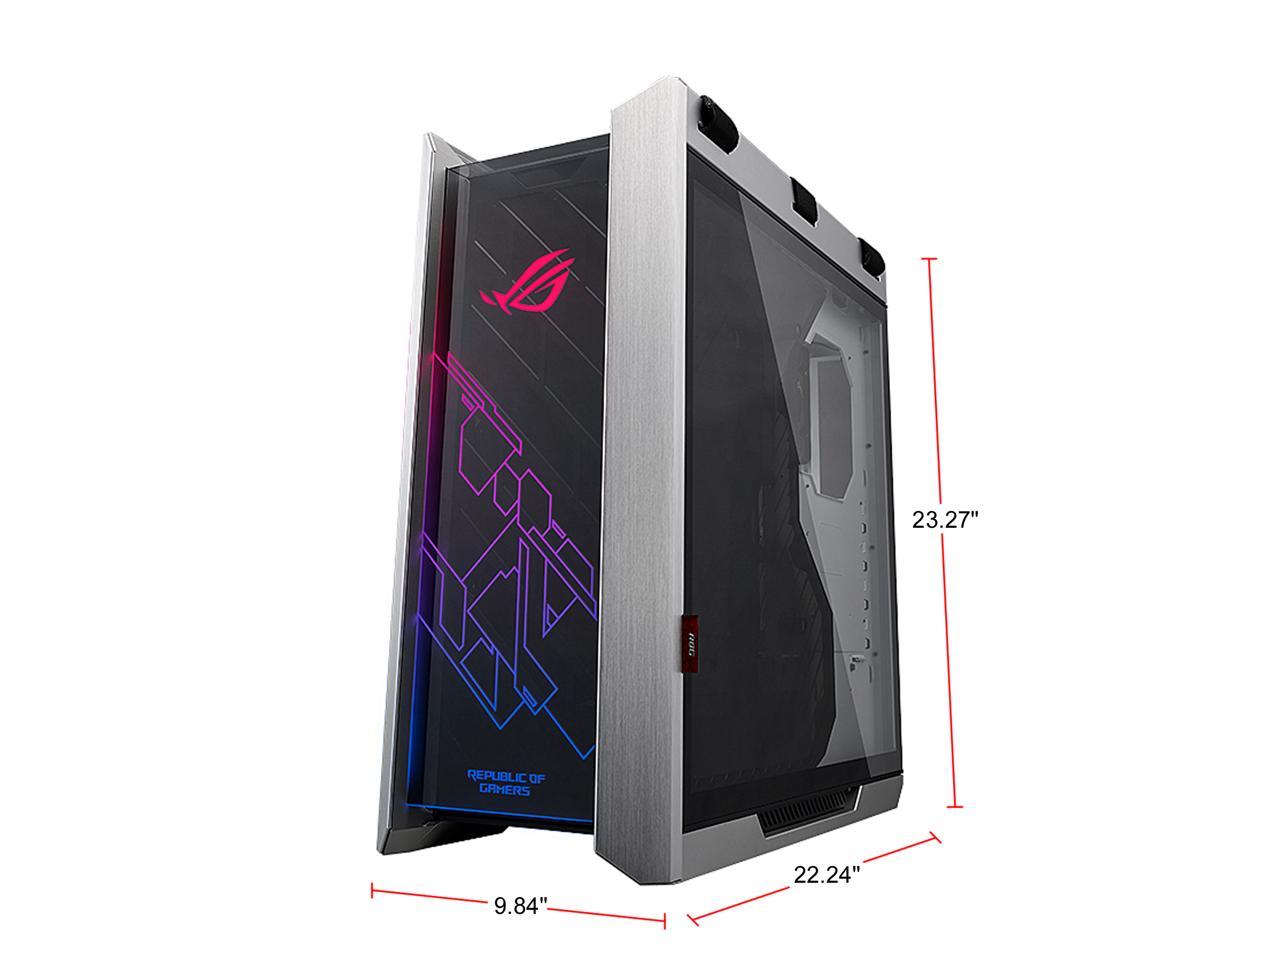 Asus Rog Strix Helios Gx601 White Edition Rgb Mid Tower Computer Case For Atx Eatx Motherboards With Tempered Glass Aluminum Frame Gpu Braces 4mm Radiator Support And Aura Sync Newegg Com